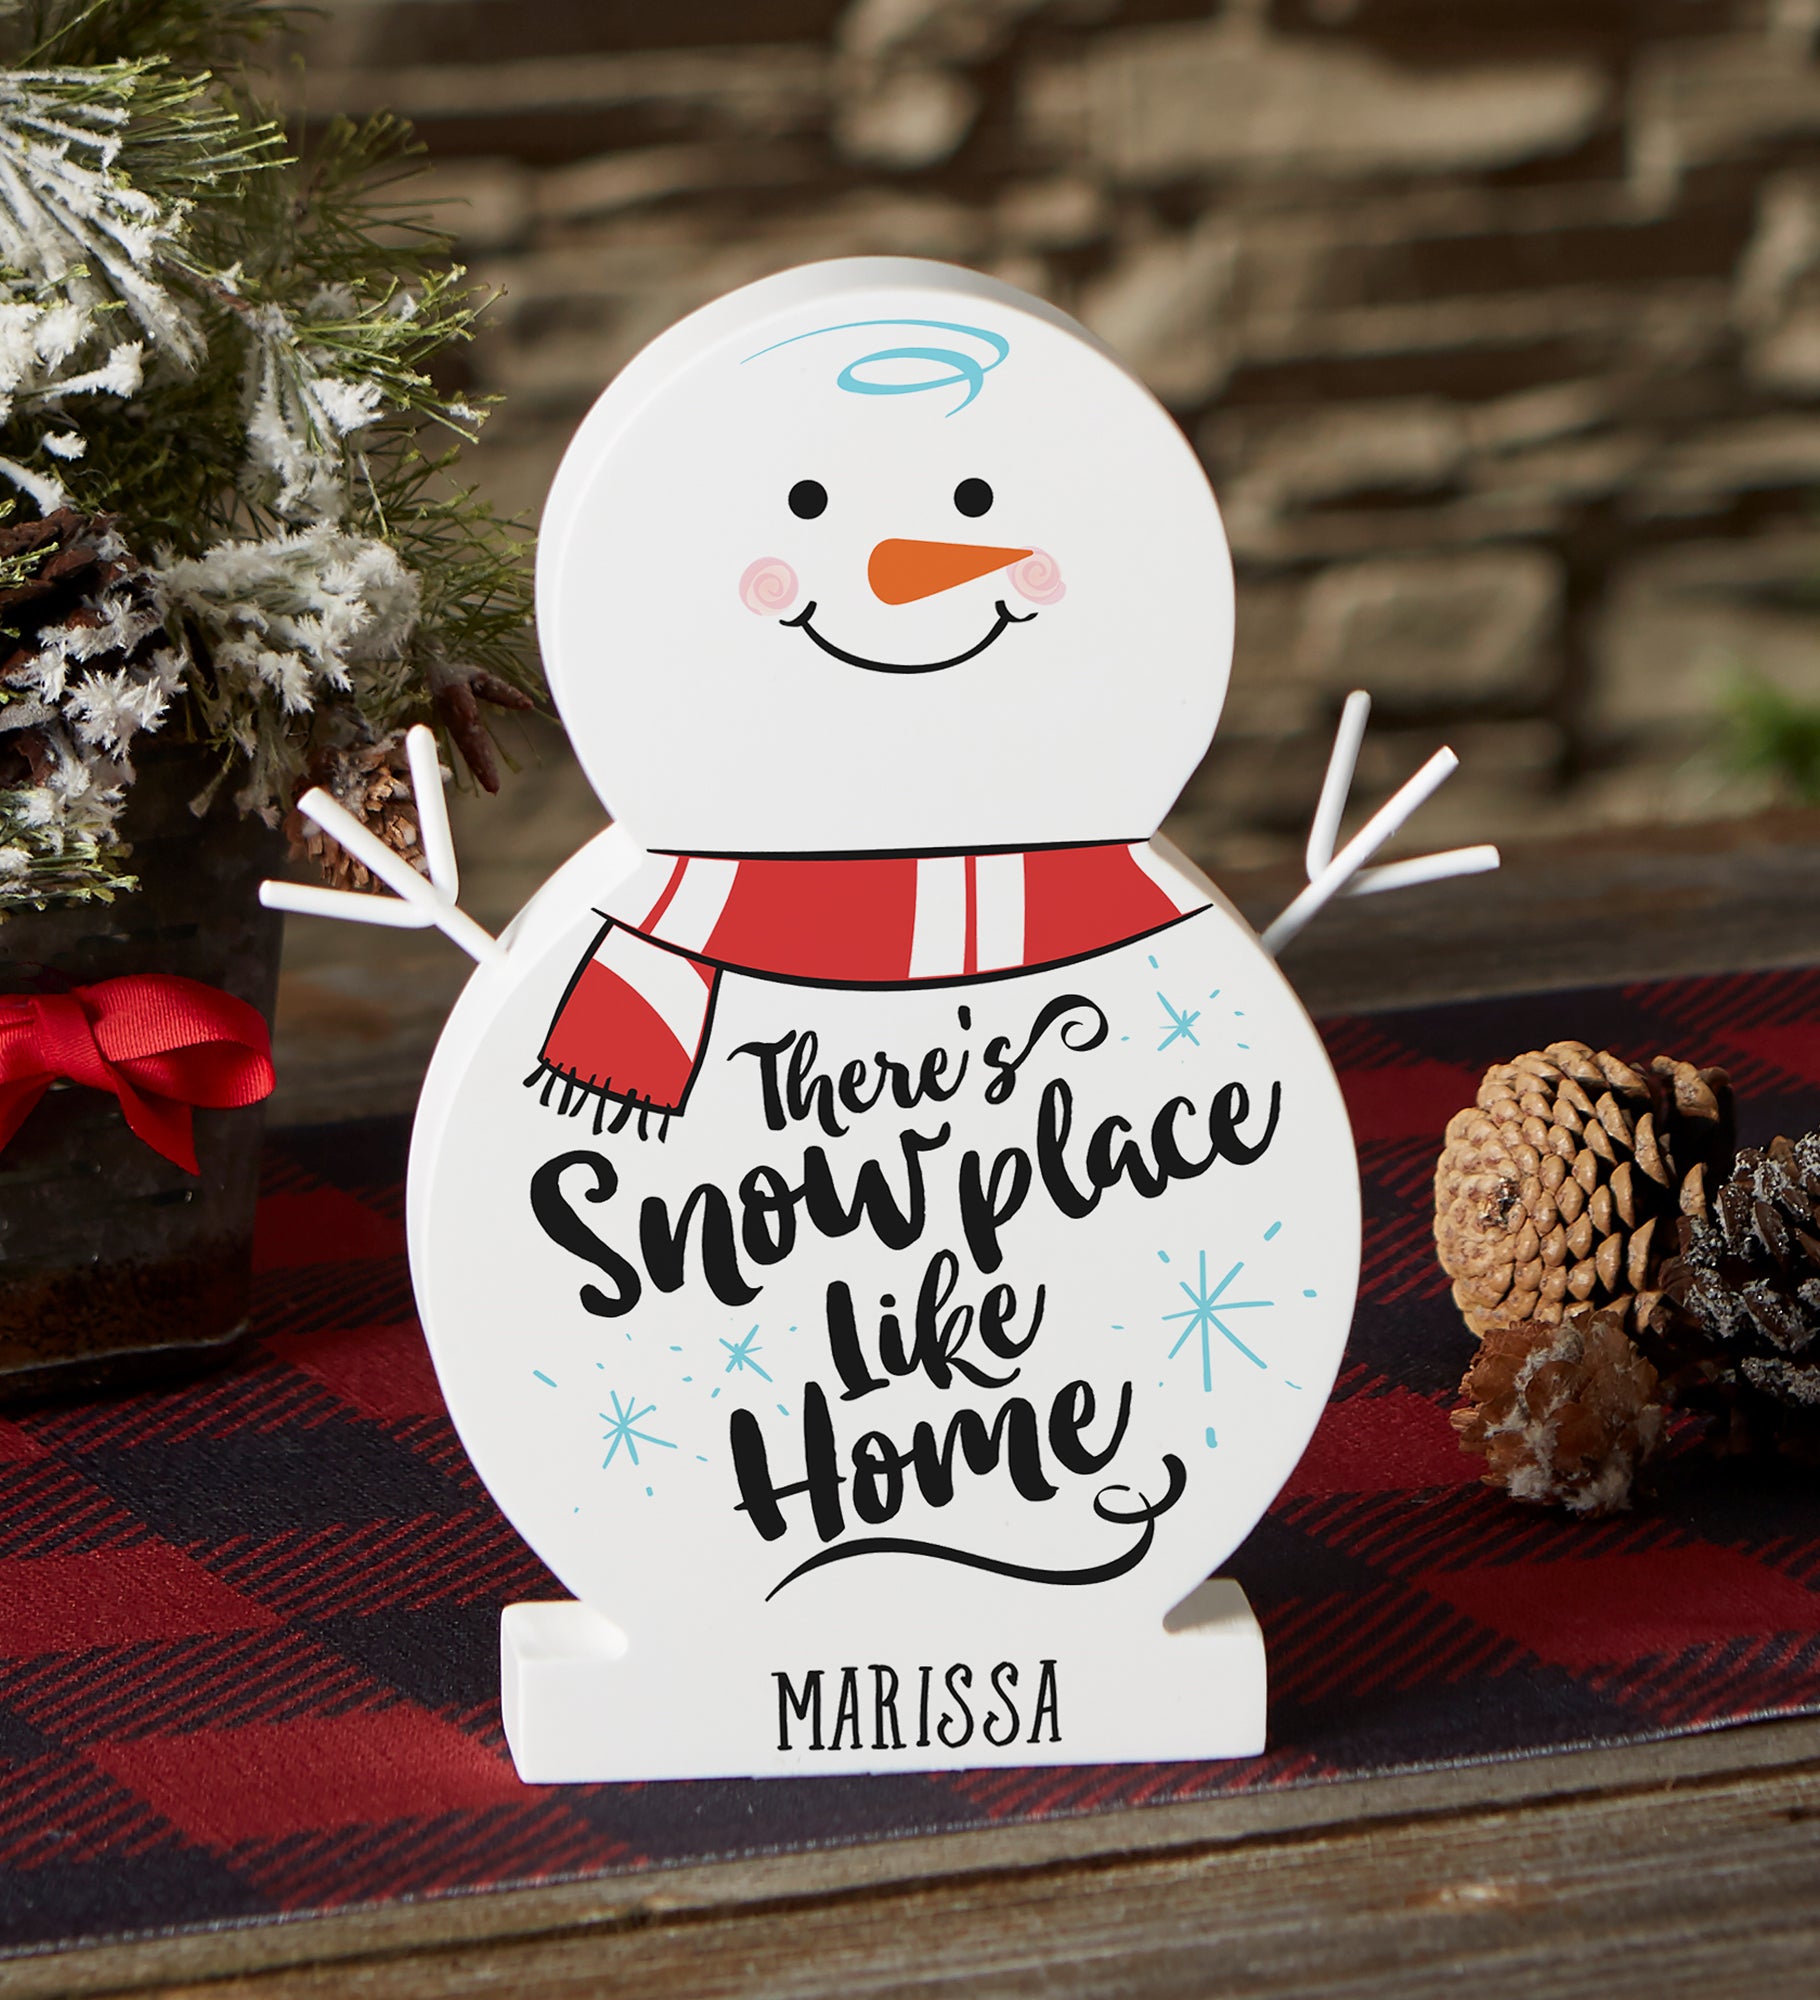 Snowplace Like Home Personalized Wood Snowman